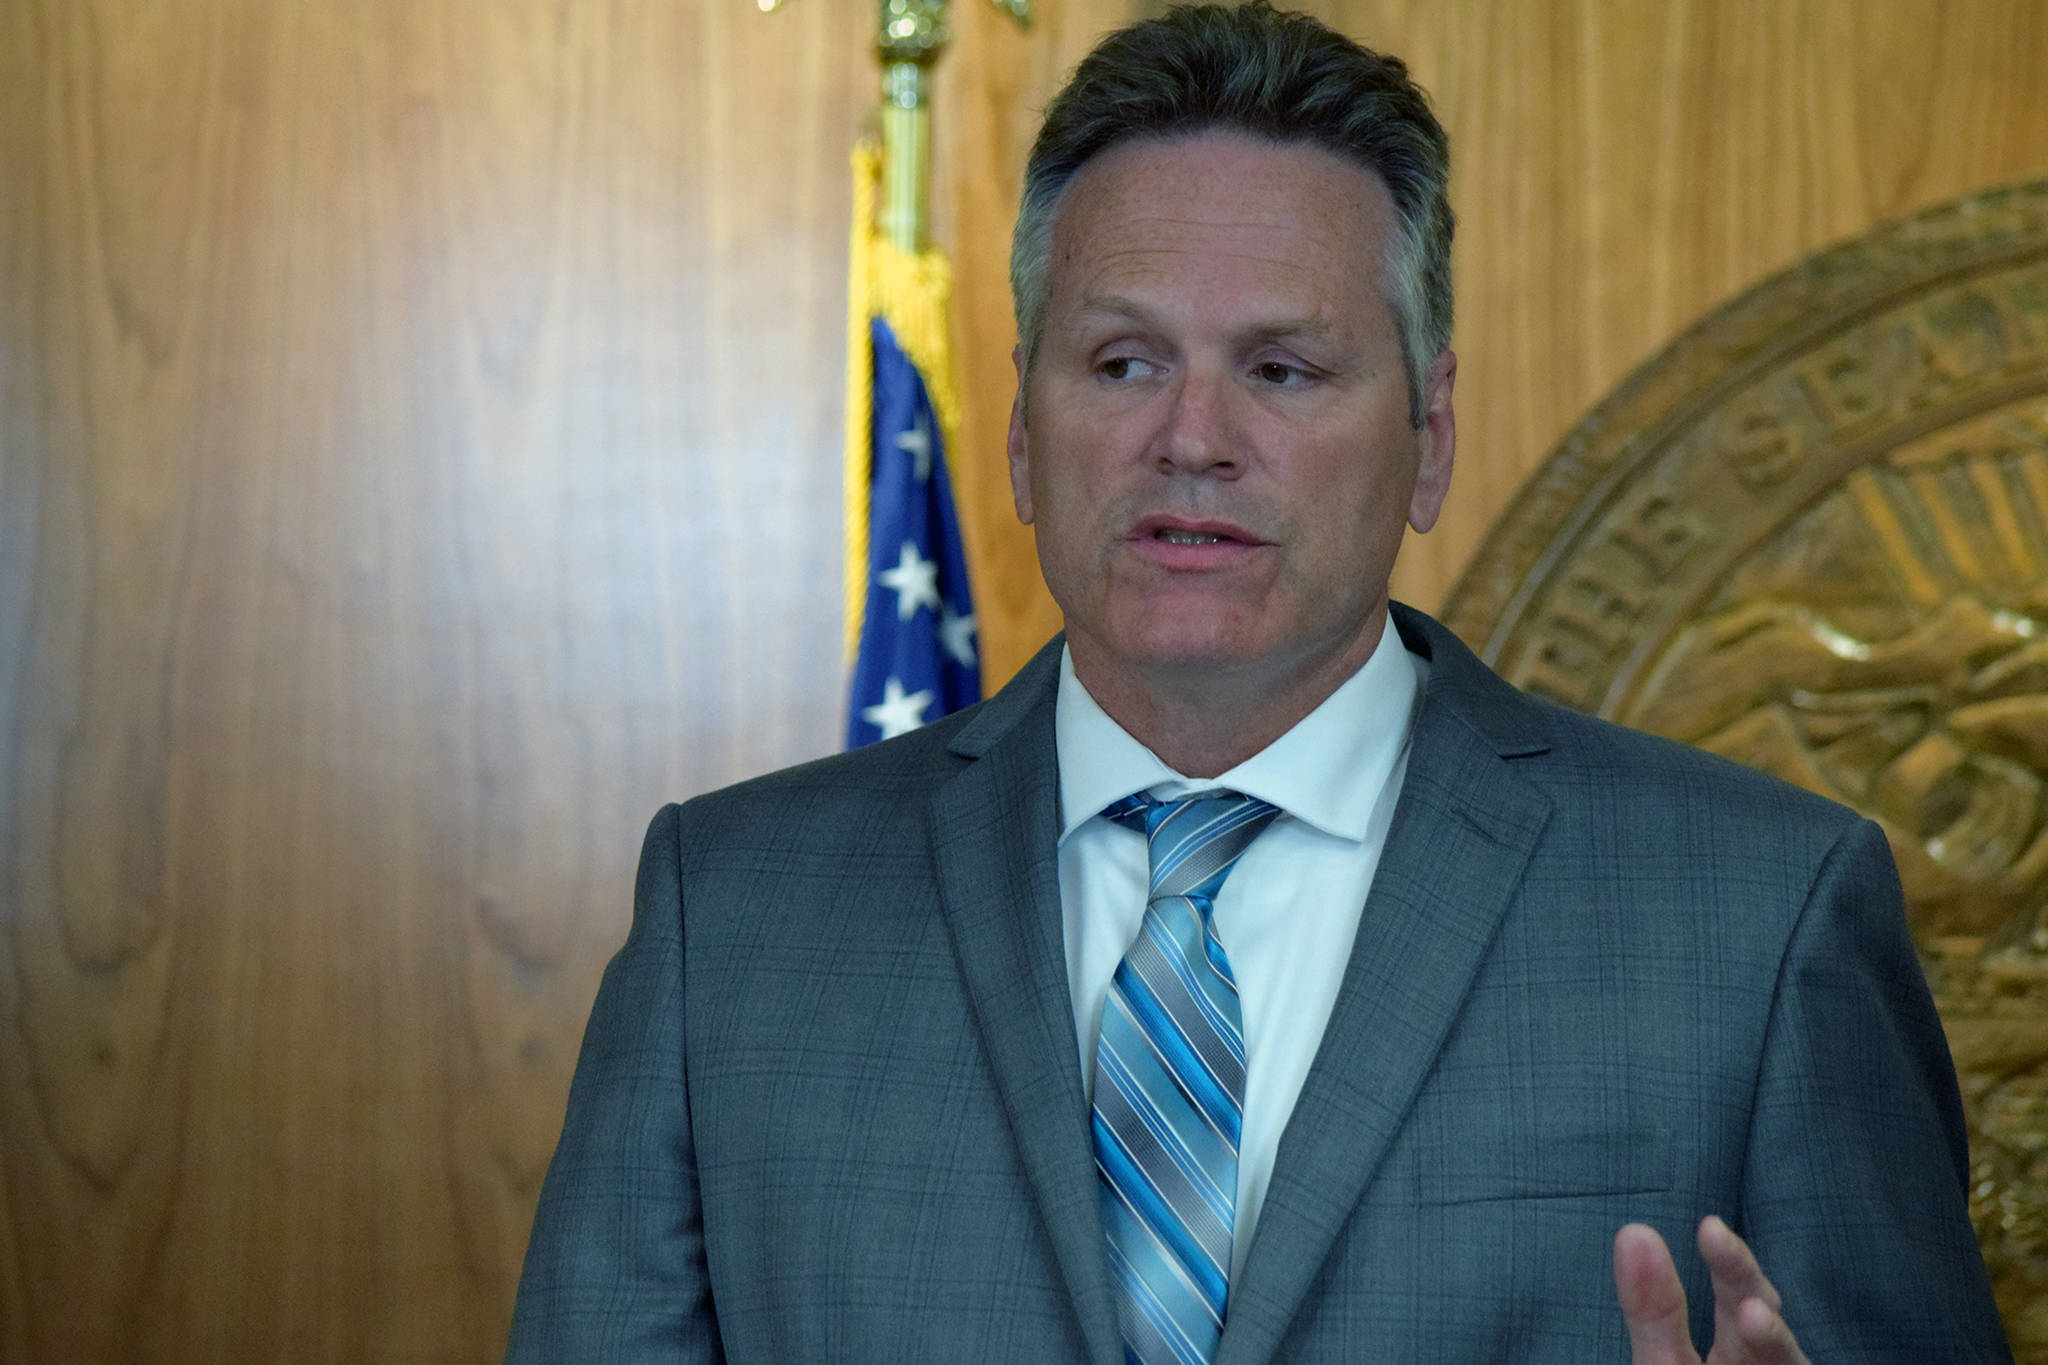 Gov. Mike Dunleavy speaks during a press conference to announce more than $400 million in line-item vetoes to the Legislature-approve budget, Friday, June 28, 2019. (Ben Hohenstatt | Juneau Empire)